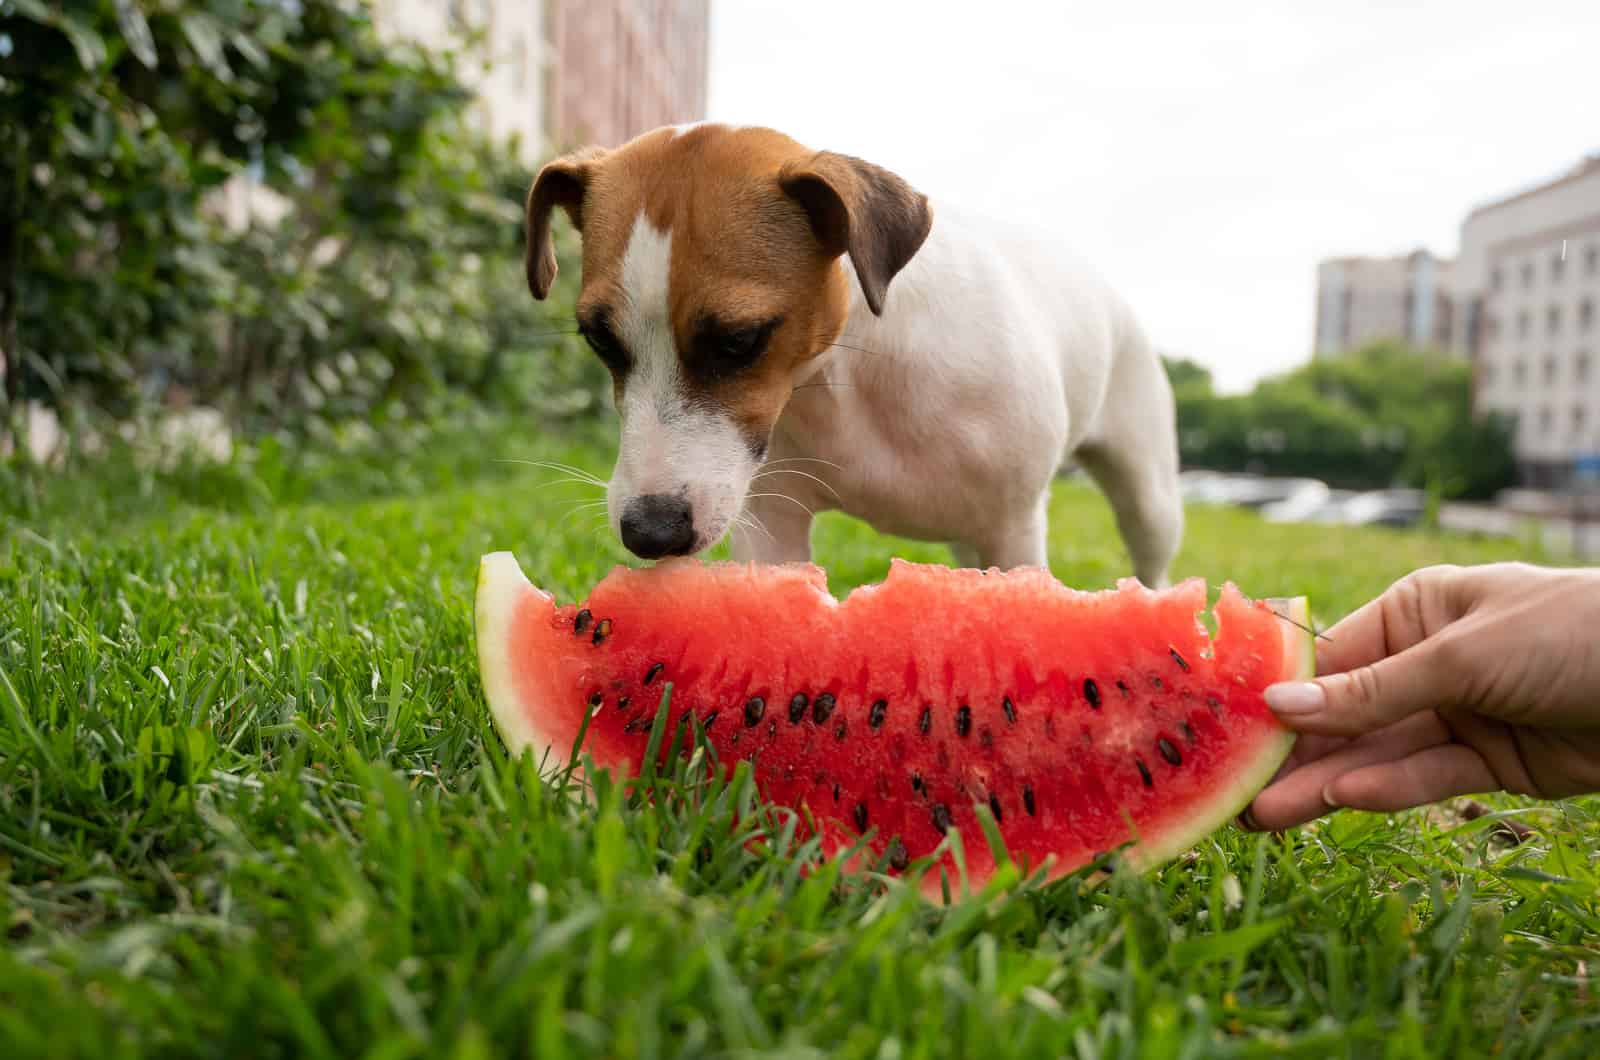 Jack russell terrier dog eating watermelon on the green lawn